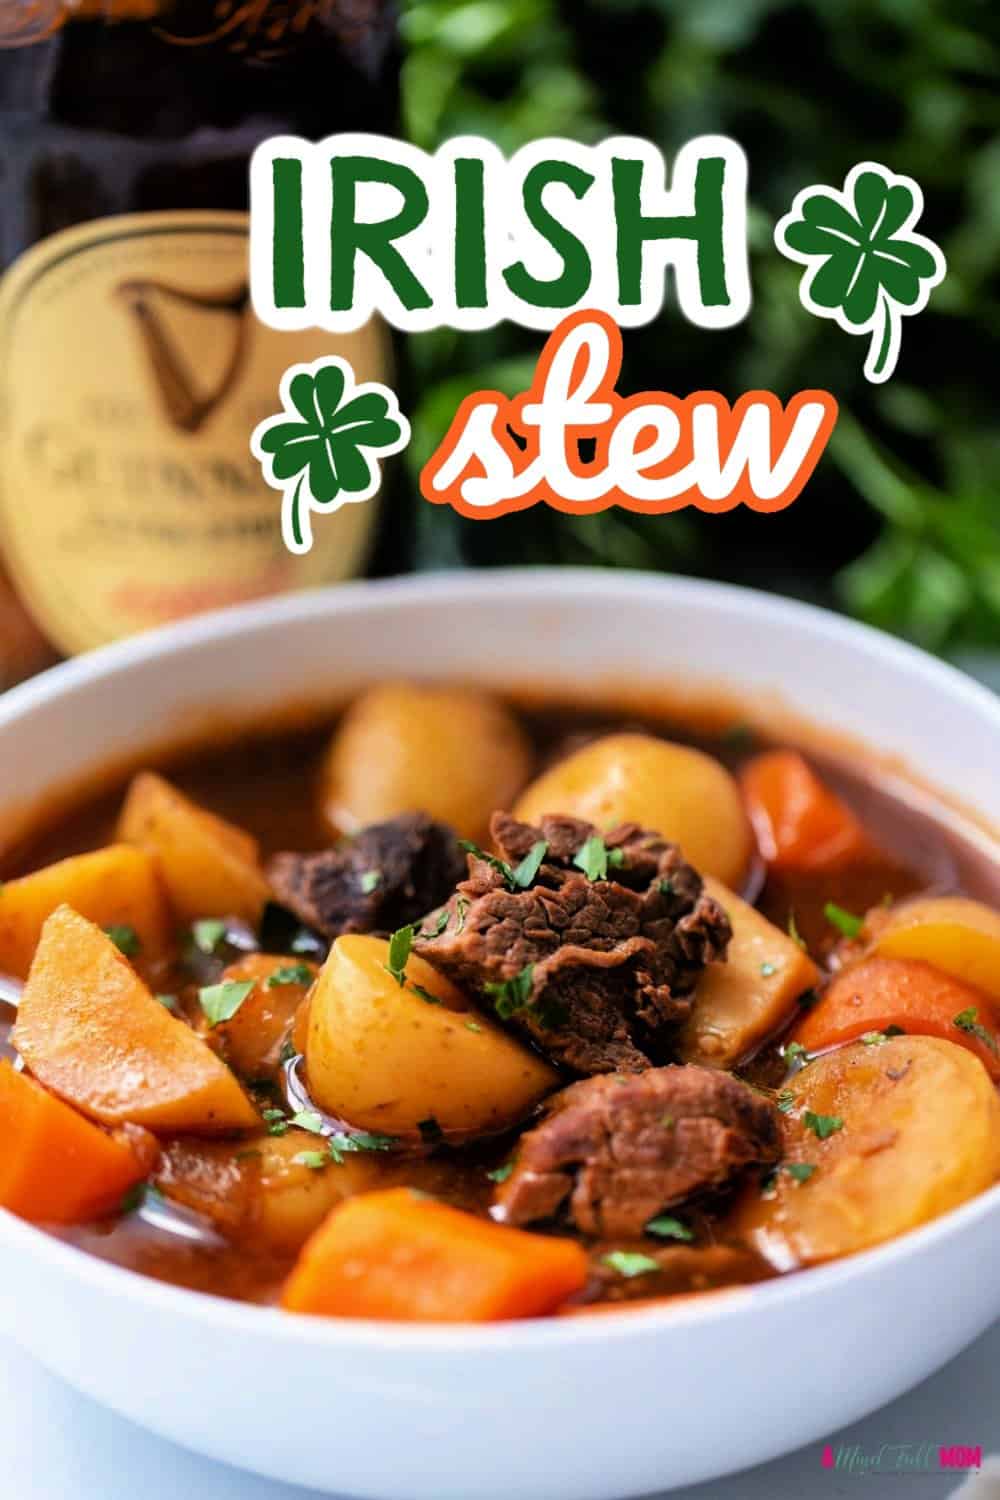 Irish Stew is a richly flavored, hearty stew made with lamb or beef, Guinness beer, and root vegetables. This delicious Irish-inspired stew can be made easily using the Instant Pot or Crockpot. 